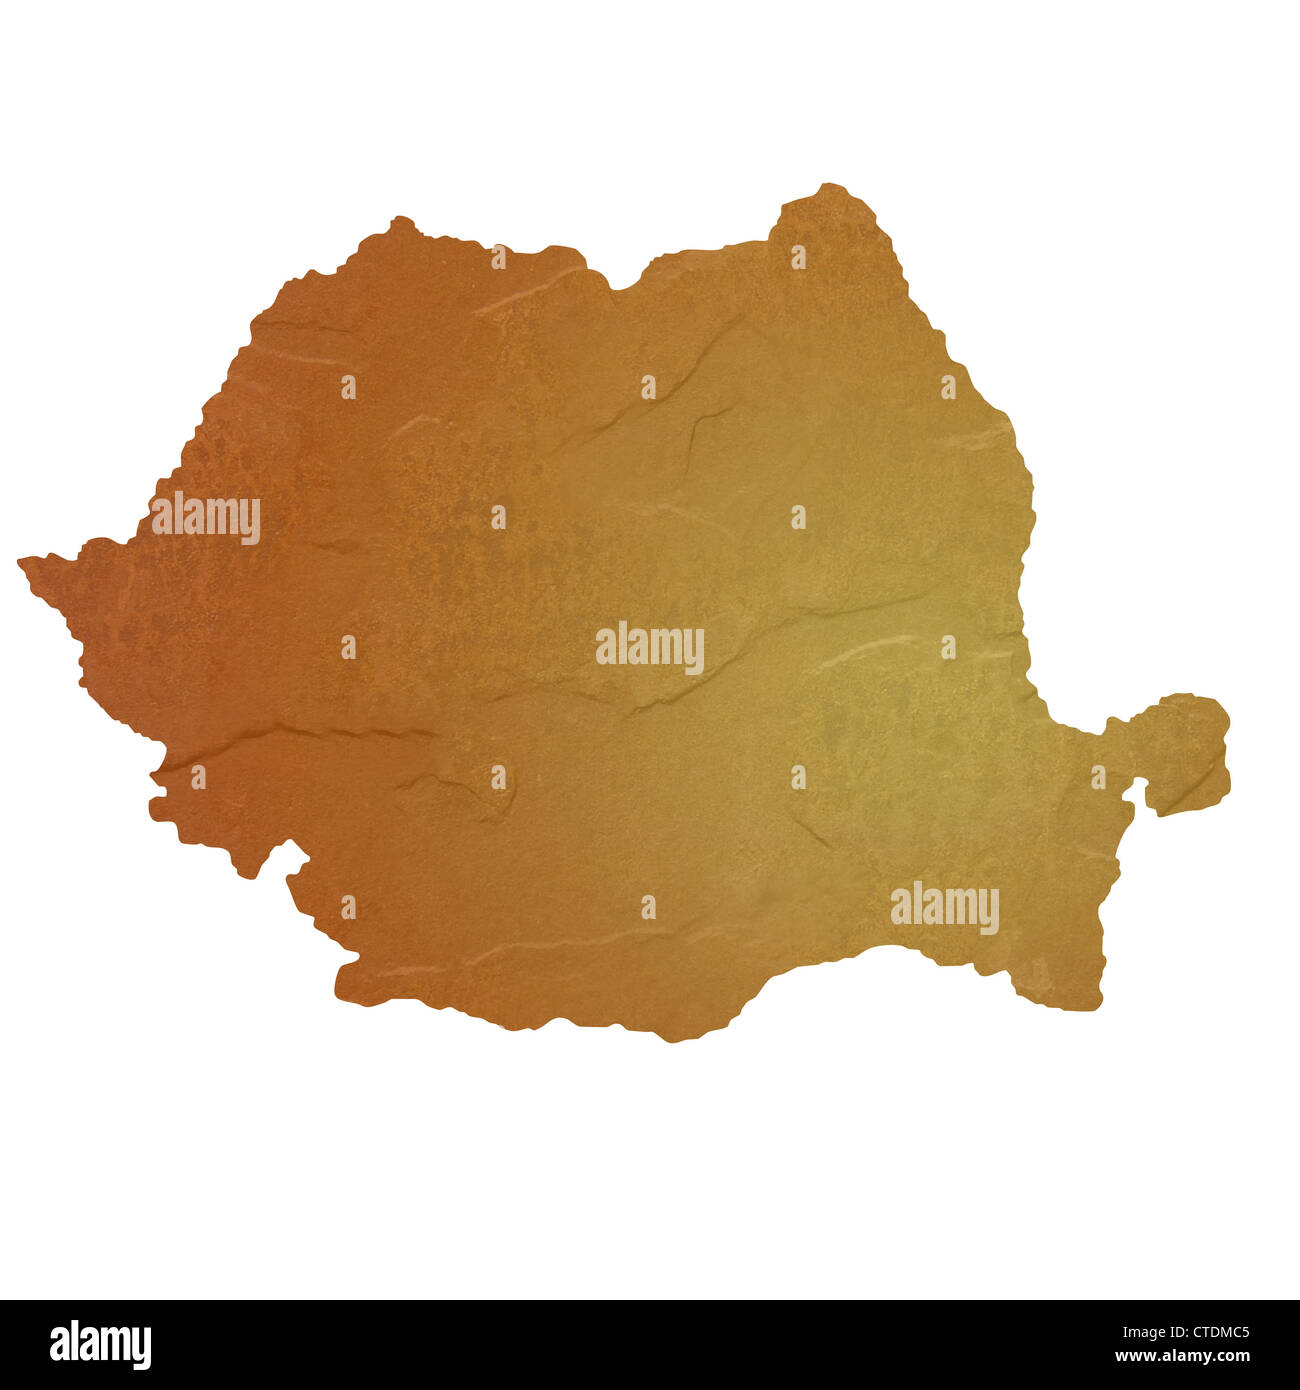 Textured map of Romania map with brown rock or stone texture, isolated on white background with clipping path. Stock Photo